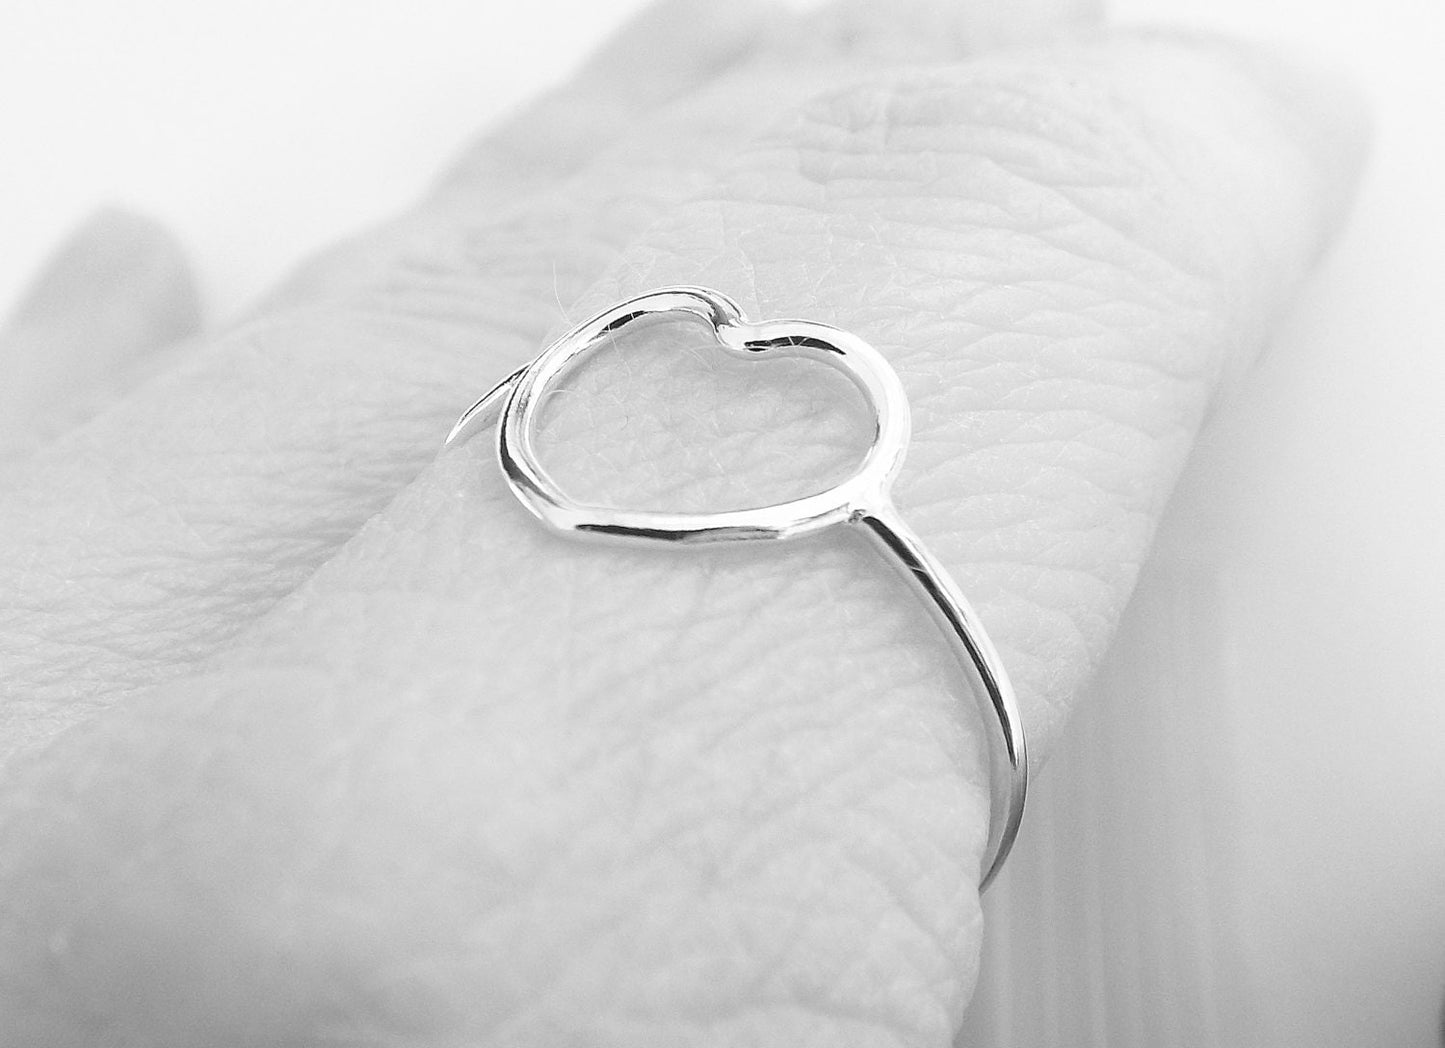 Simple Slim Silver Heart Ring, Heart Ring, Simple Heart, Slim Ring, Heart Jewelry, Heart, Open Heart Ring, Little Heart Ring, Love Ring,Gift